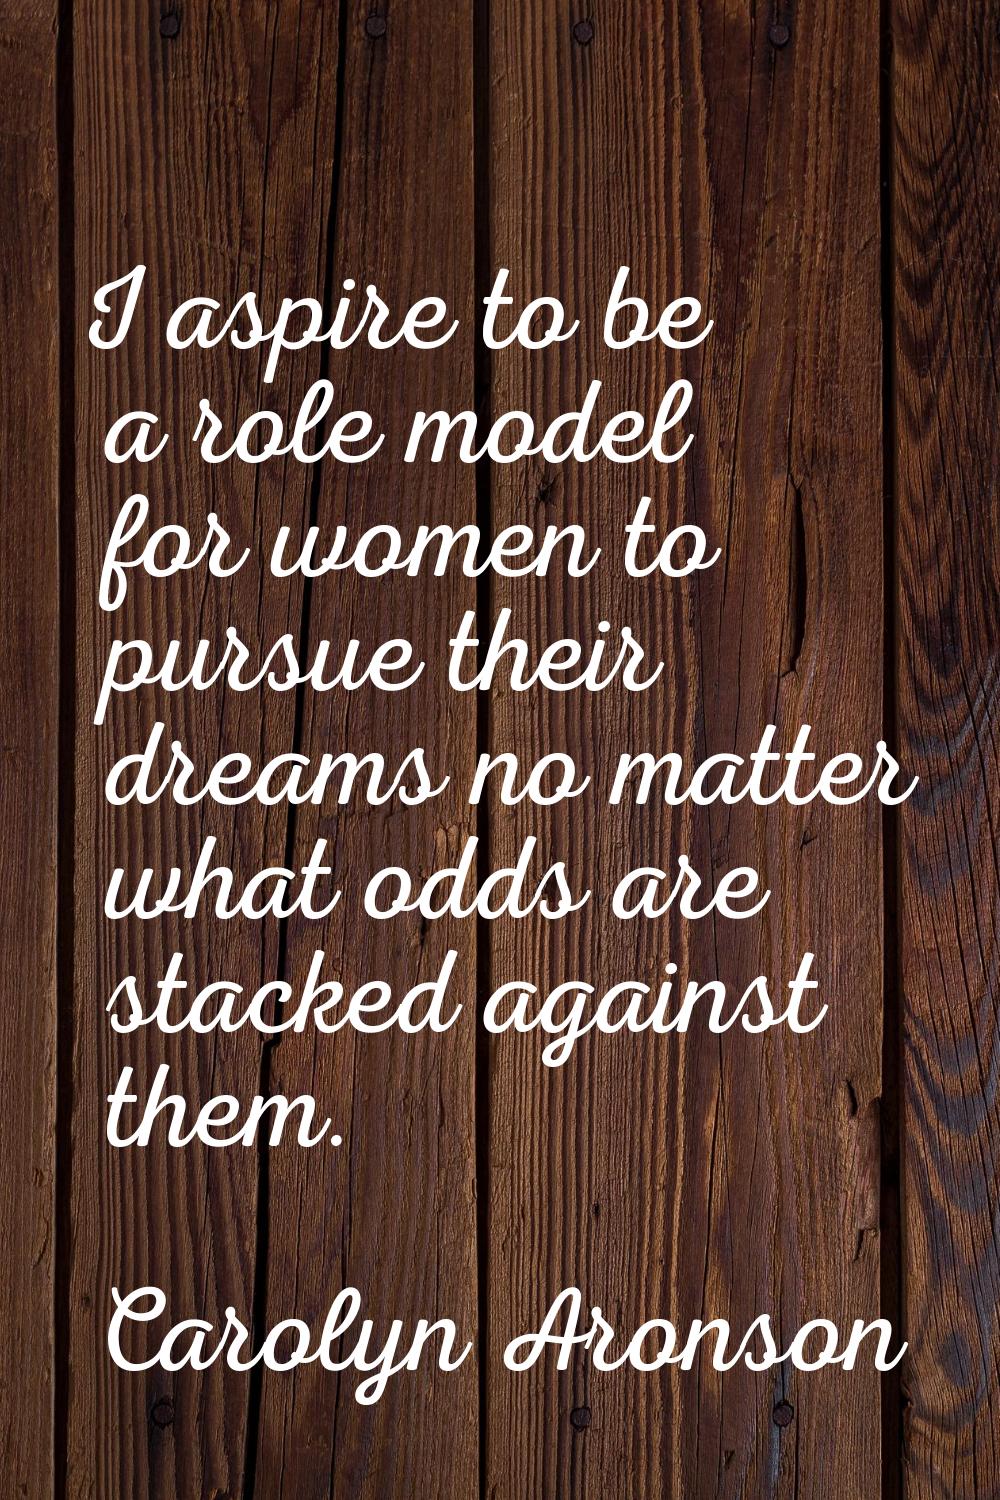 I aspire to be a role model for women to pursue their dreams no matter what odds are stacked agains